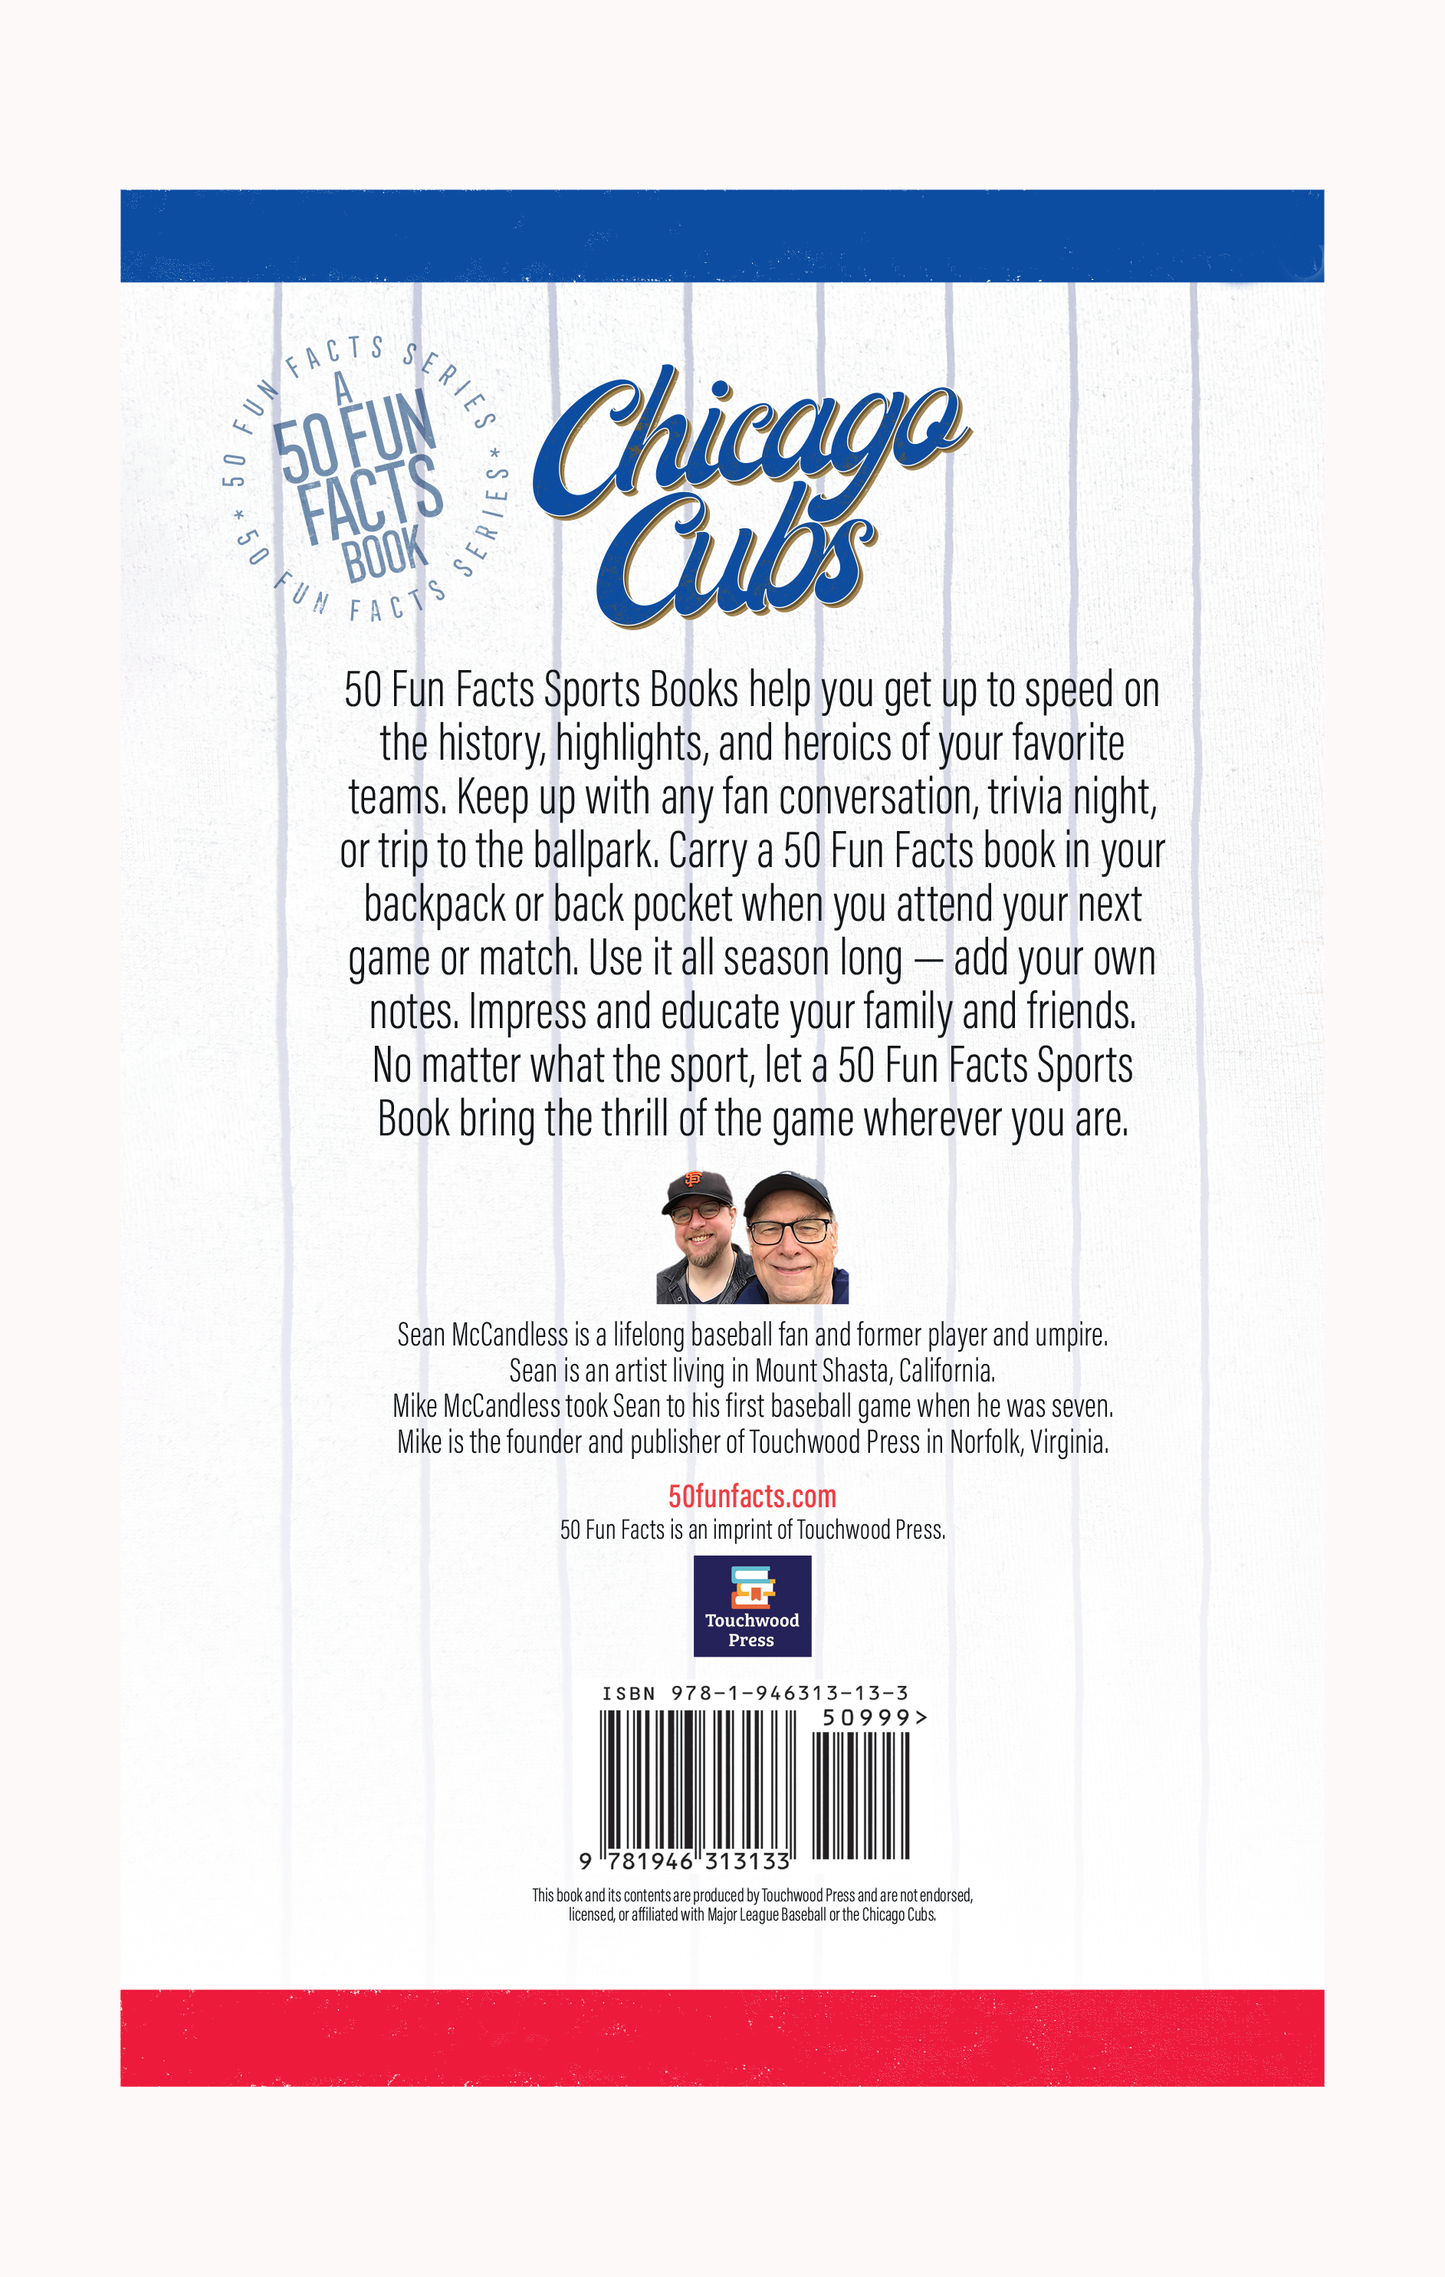 50 Fun Facts About the Chicago Cubs—Paperback, Kindle